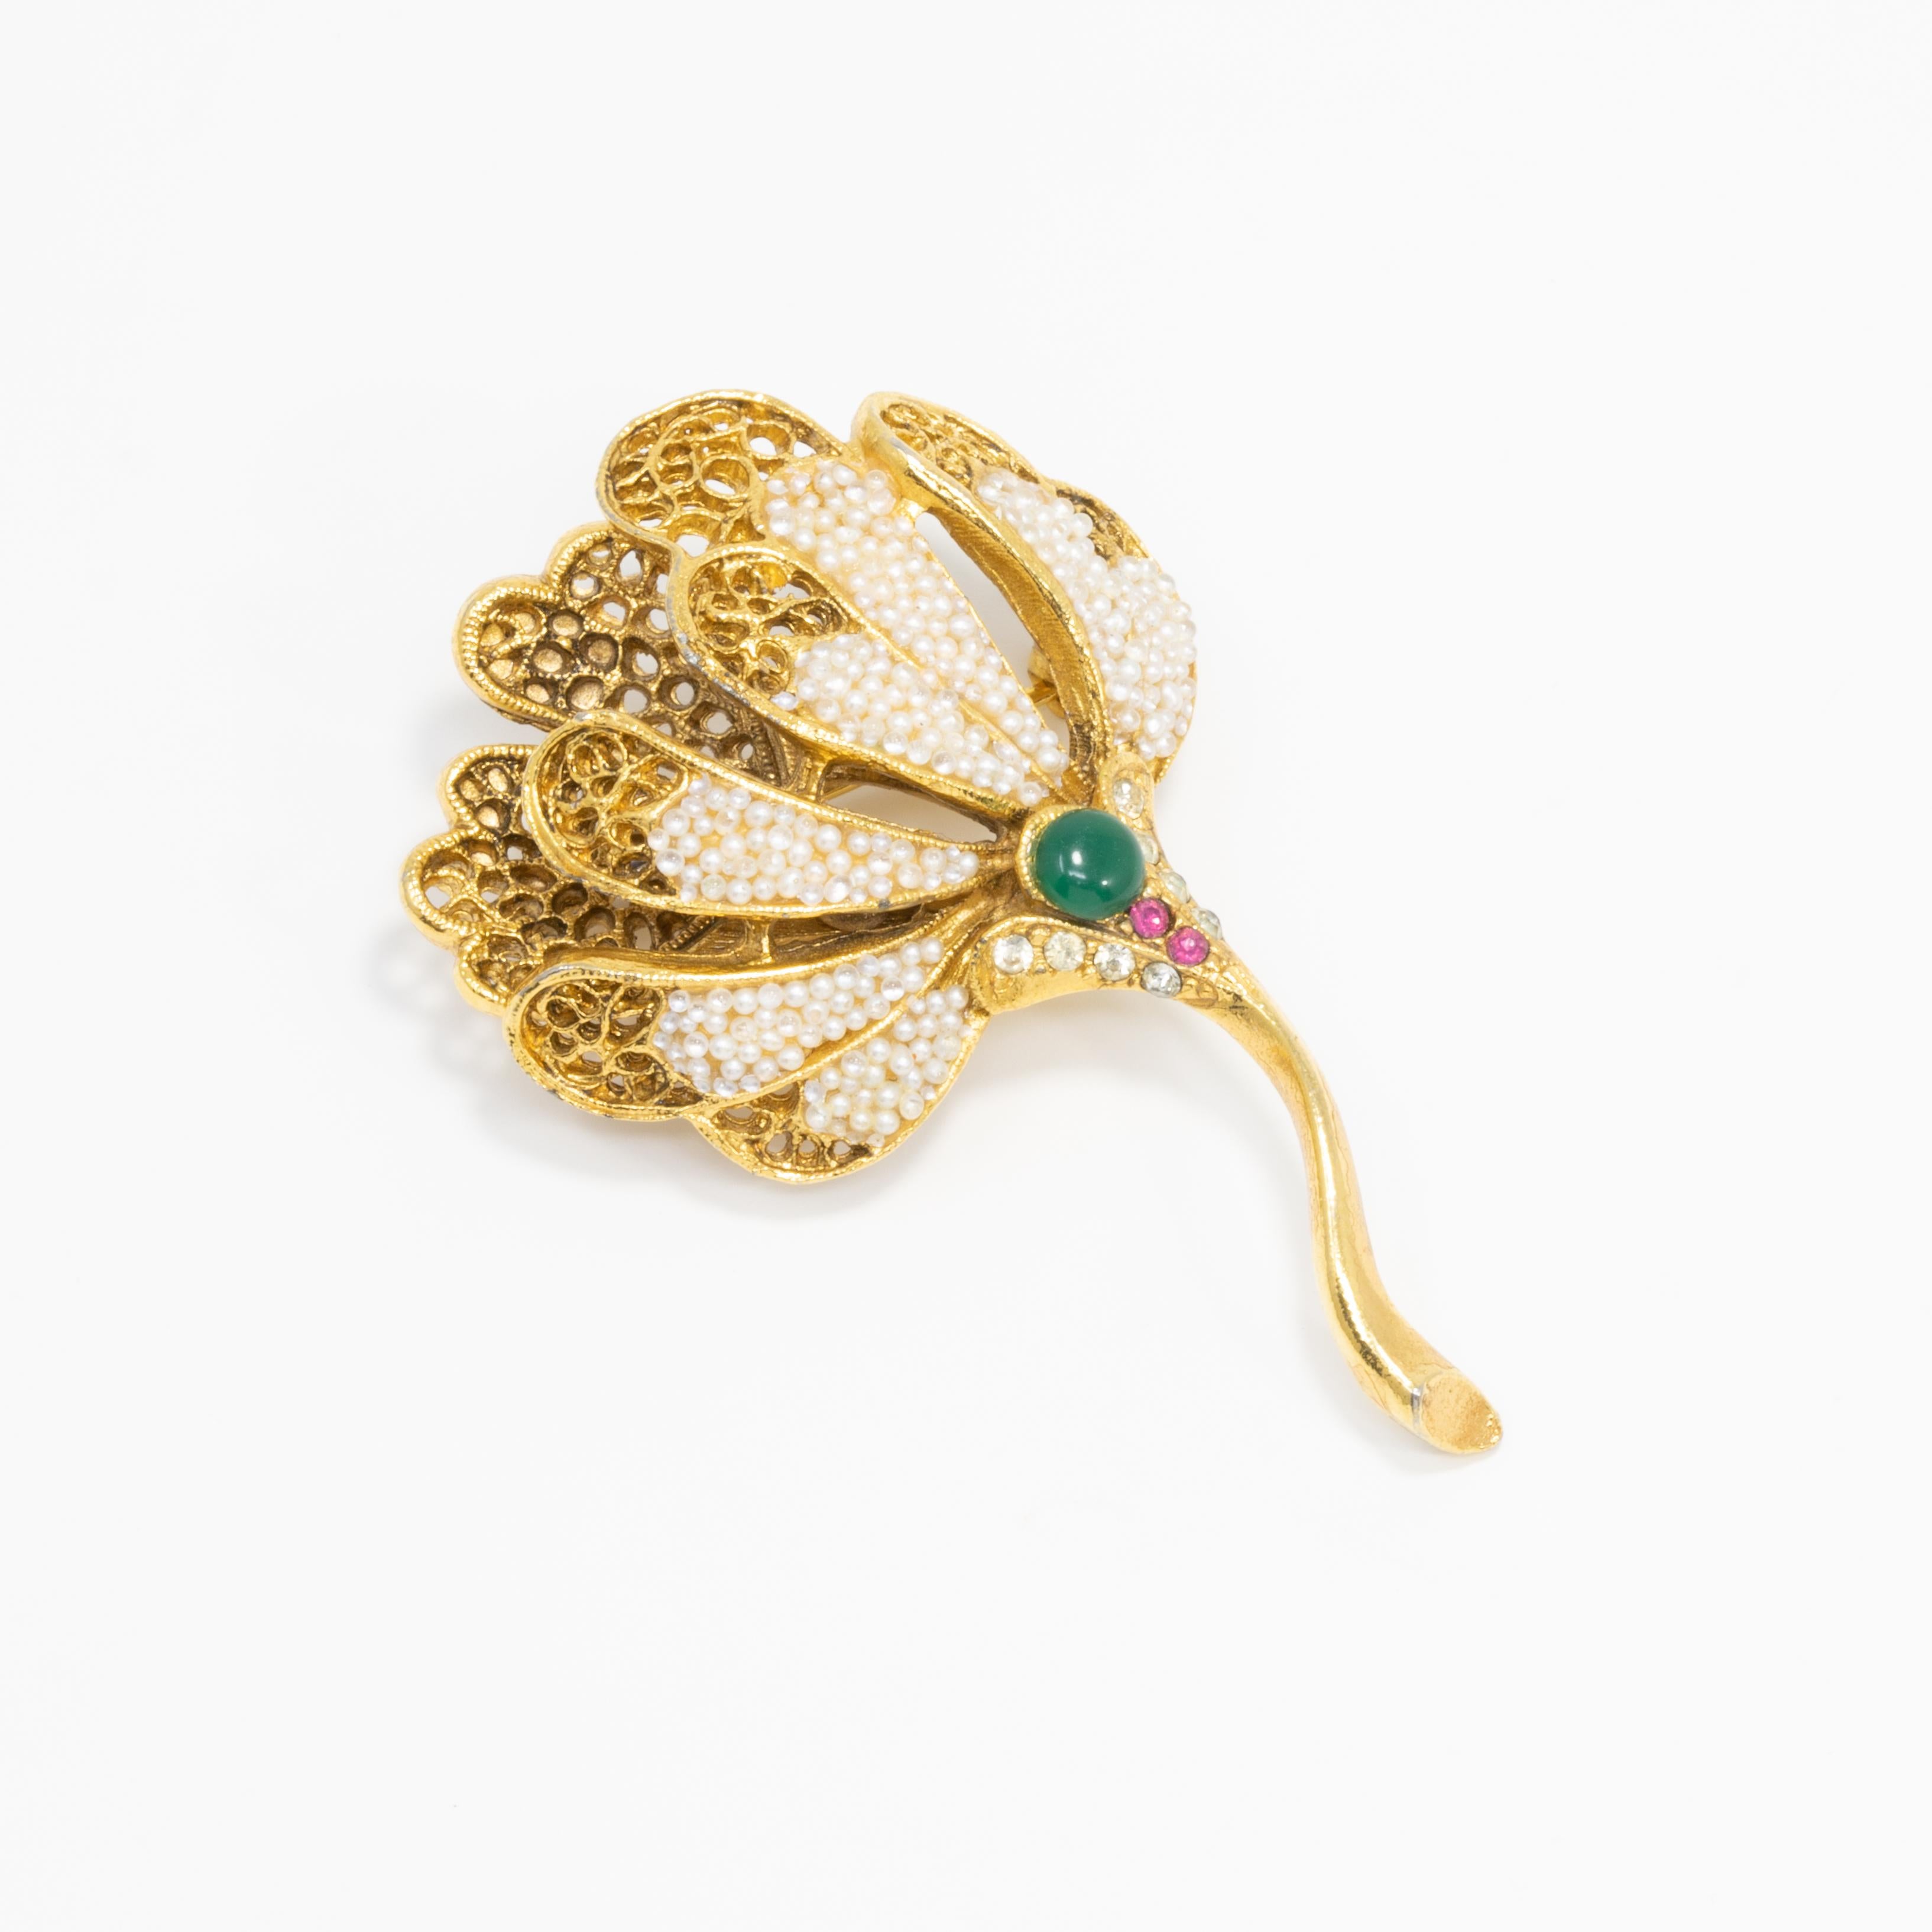 A regal-looking pin brooch by BSK. This gold-tone filigree flower is decorated with white beads, a single emerald-colored cabochon, and rose crystals.

Mid 1900s.

Hallmarks: BSK (Benny Steinberg, Slovitt and Kaslo)